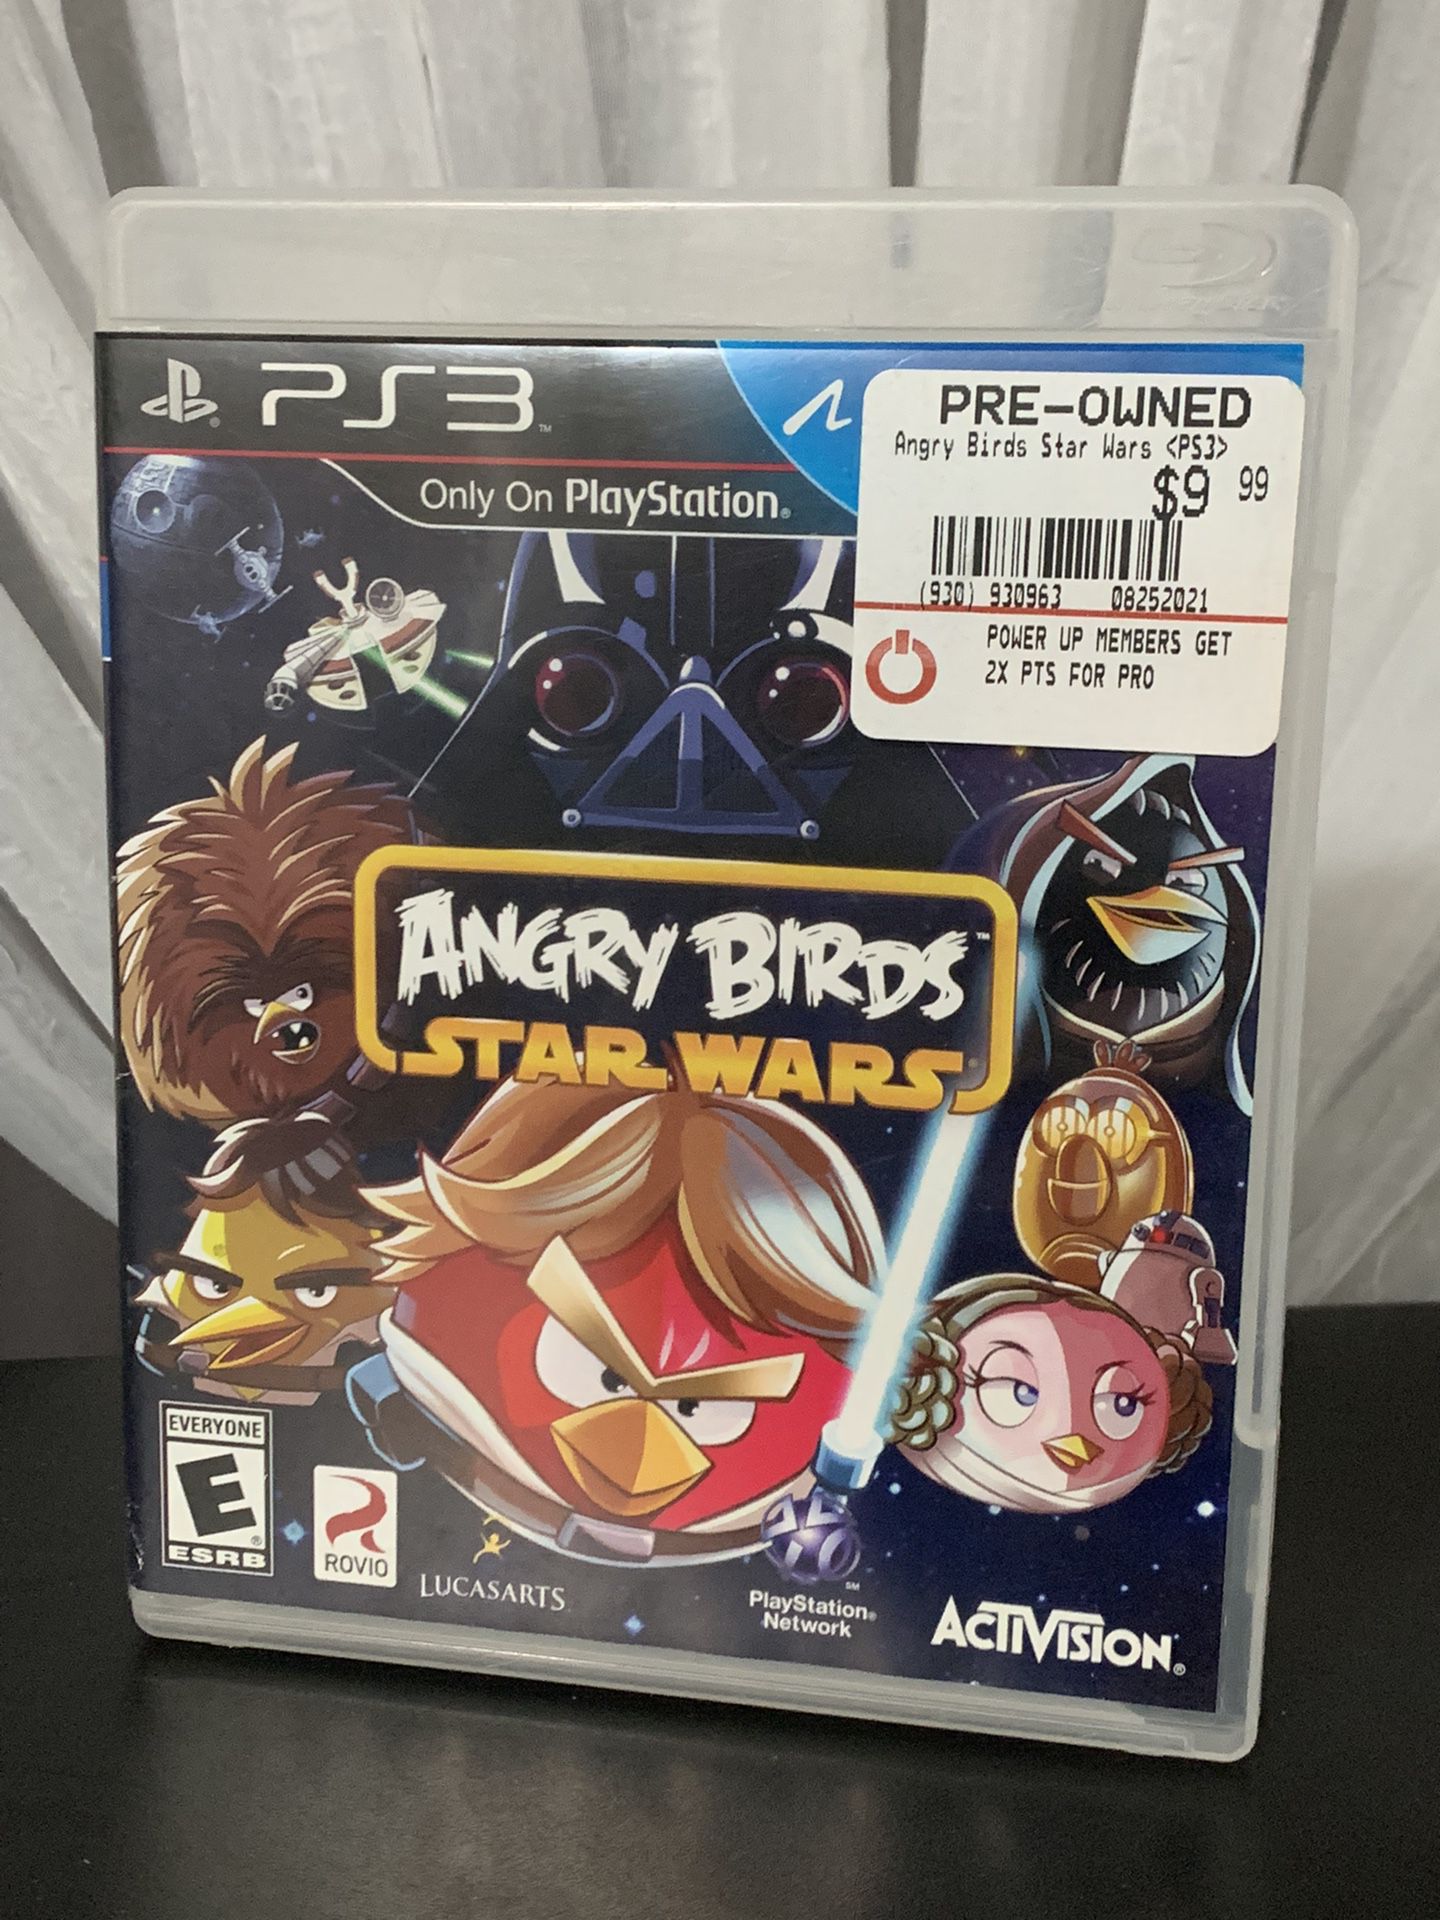 Angry Birds Star Wars for XBOX 360 for Sale in North Highlands, CA - OfferUp